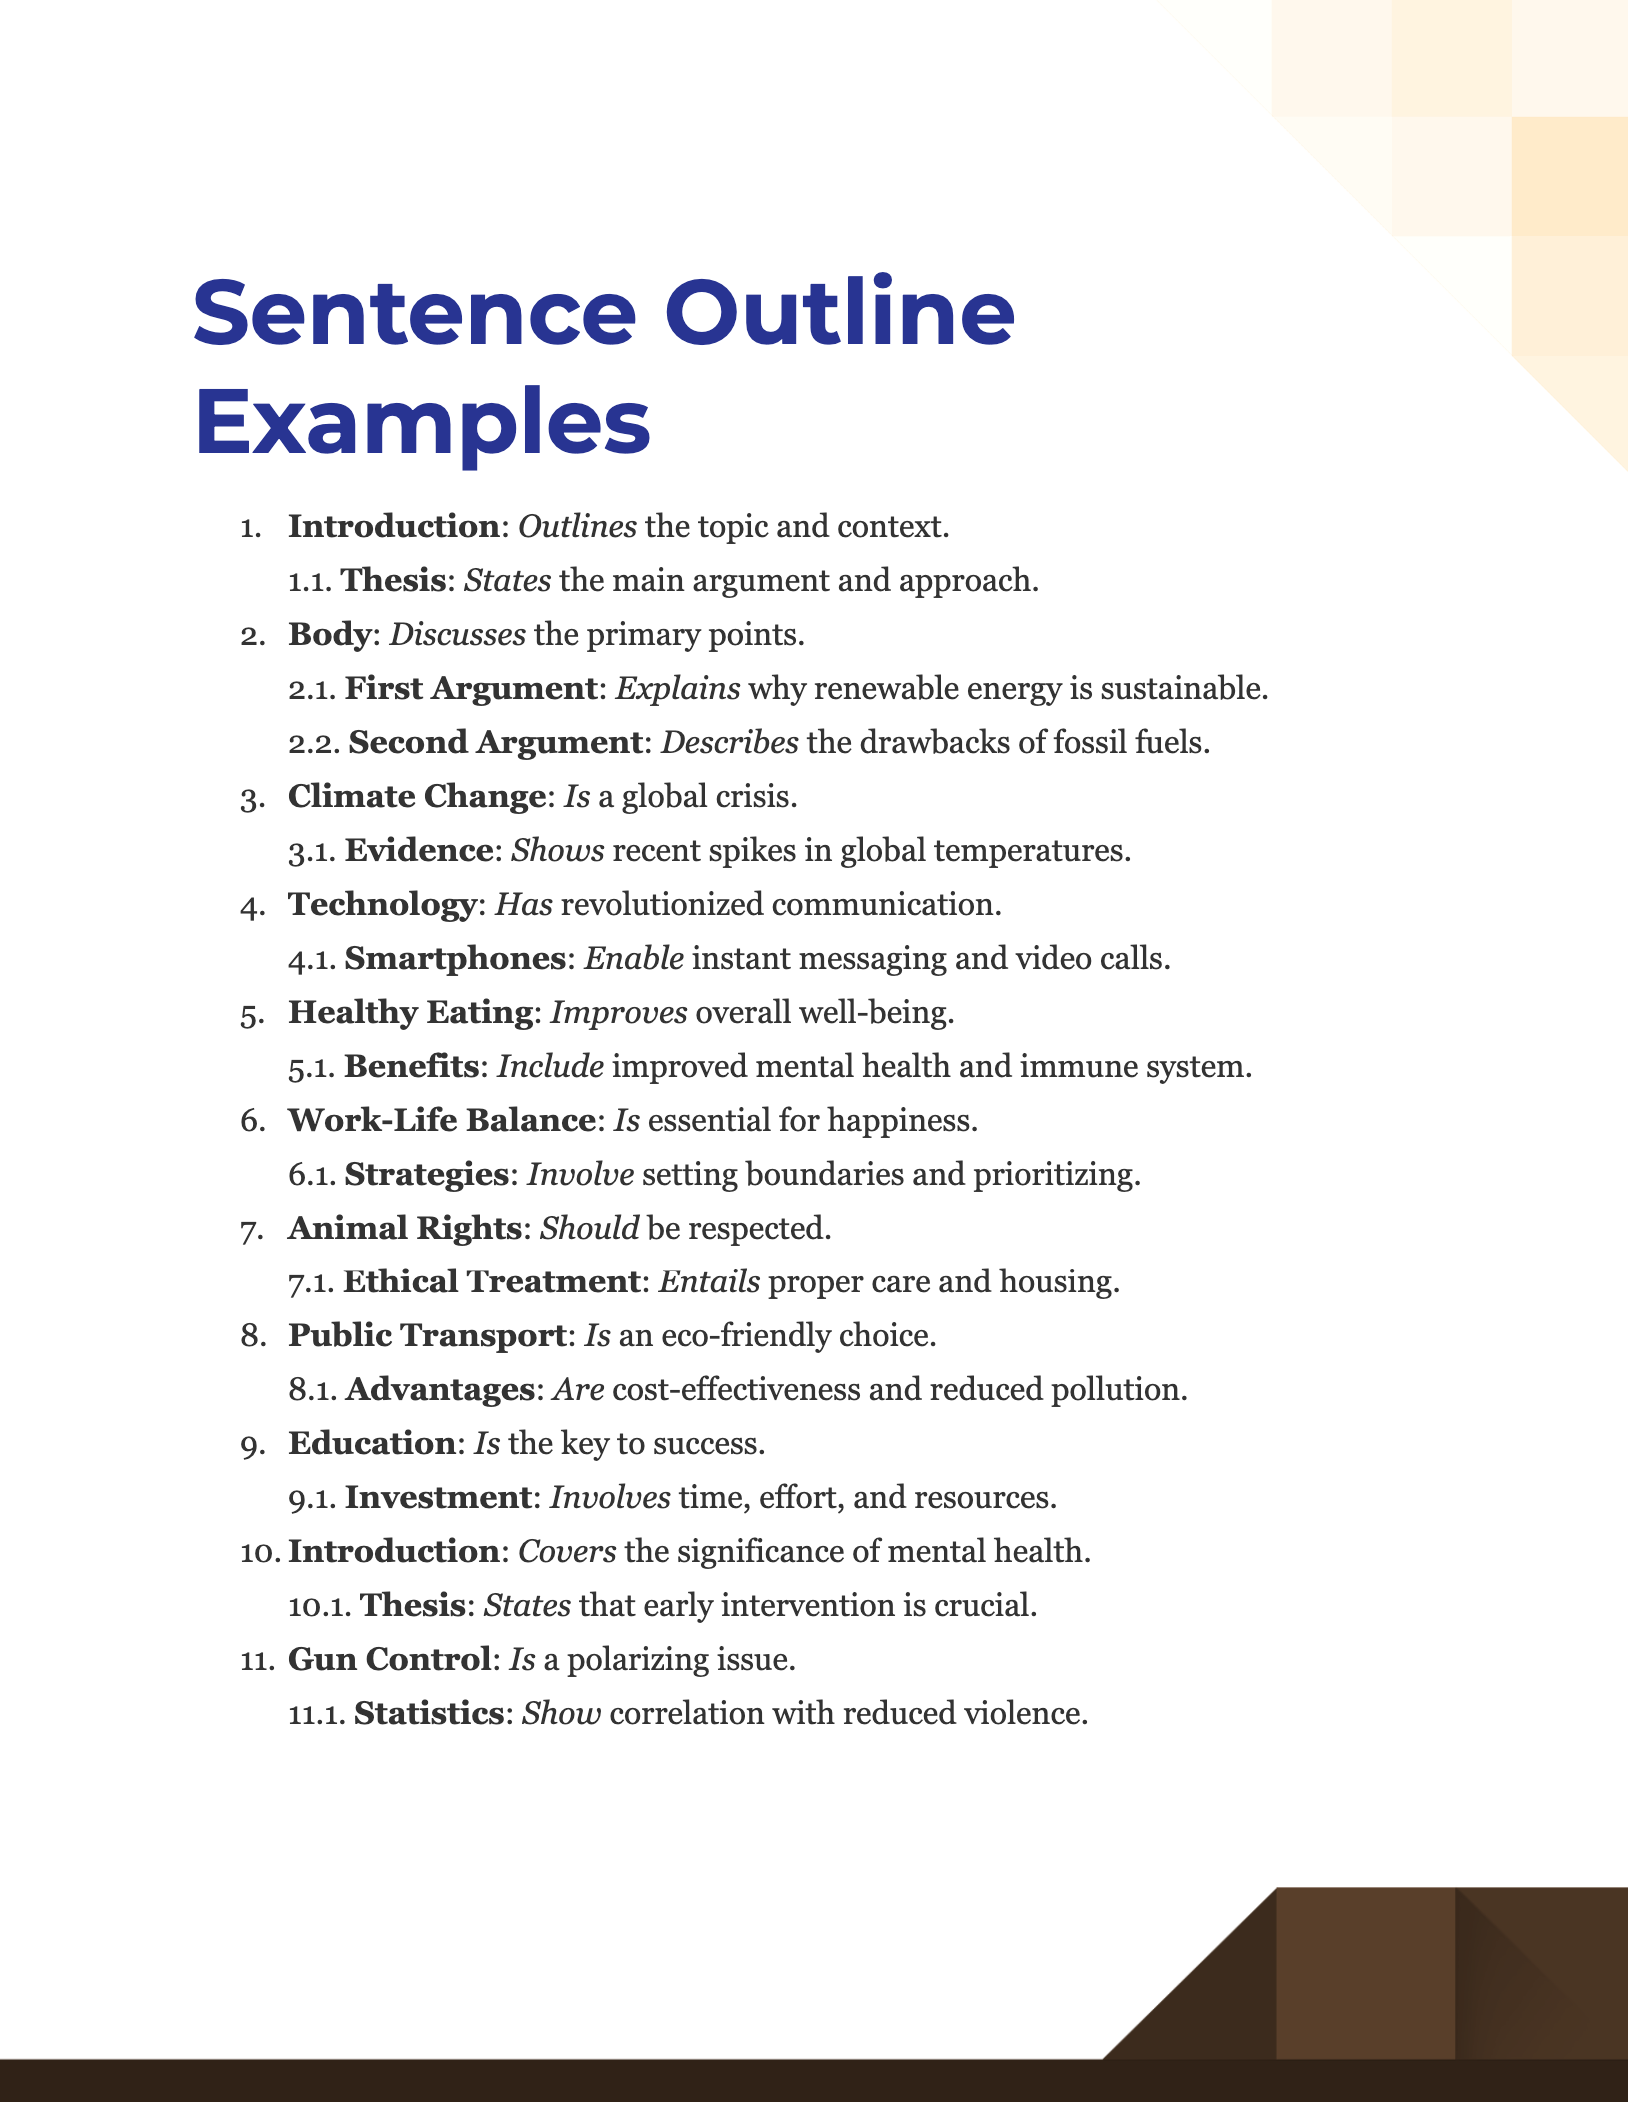 what is a topic or sentence outline